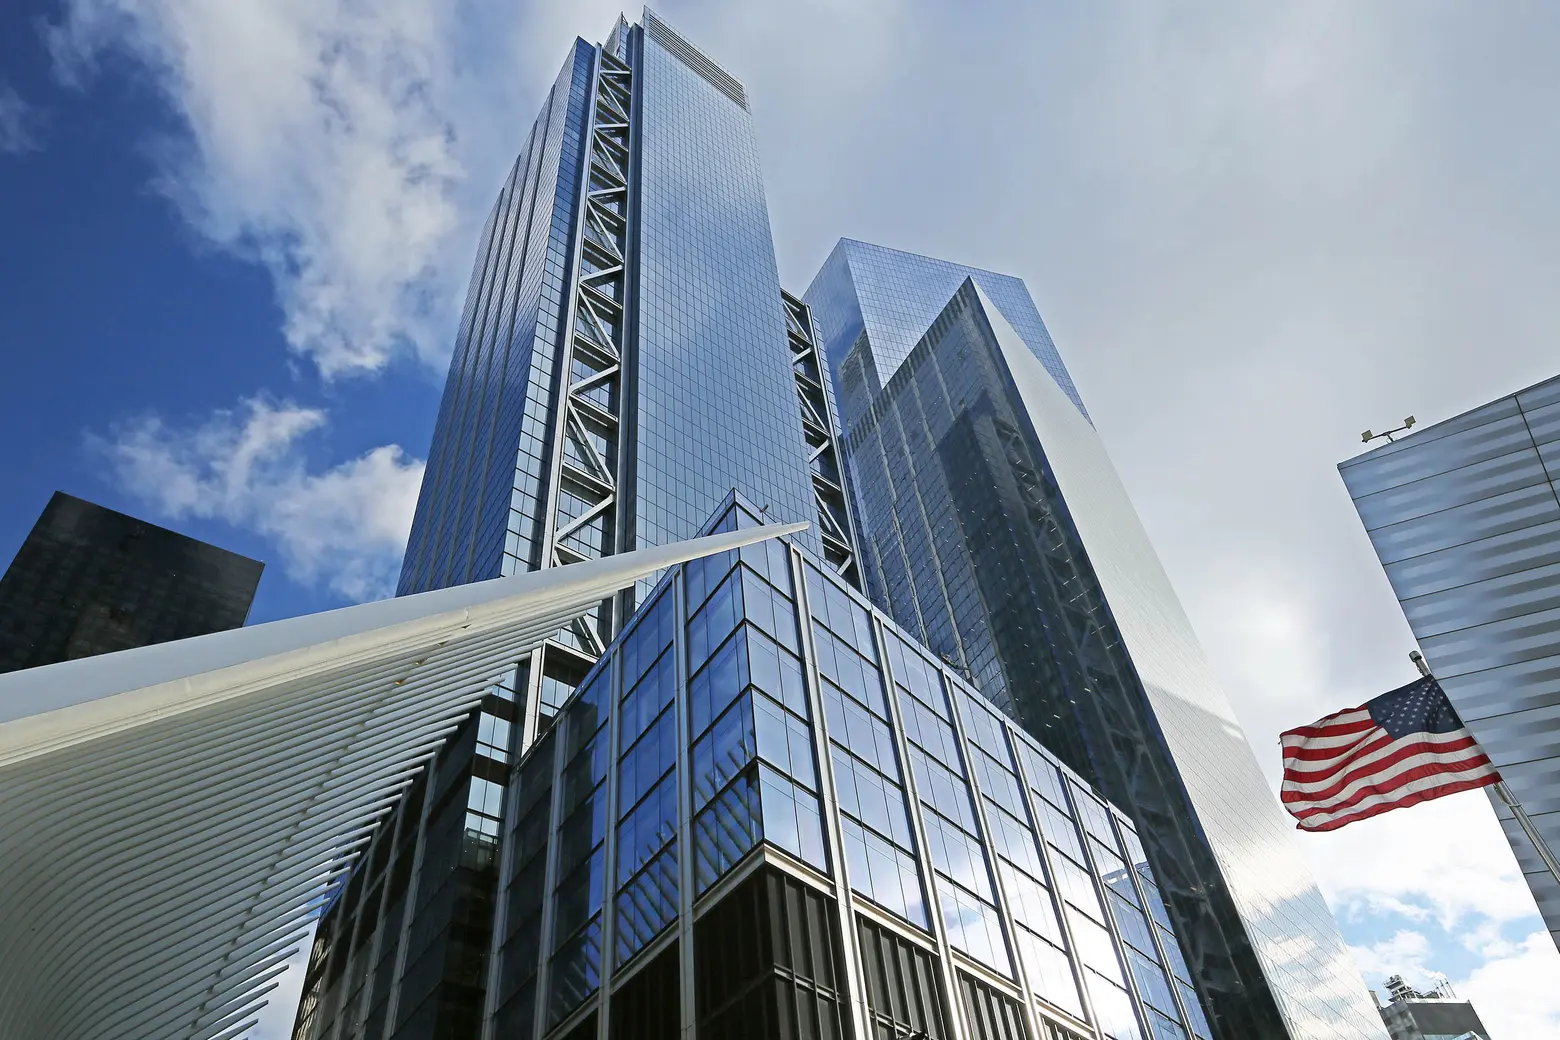 New looks for 3 World Trade Center ahead of June opening